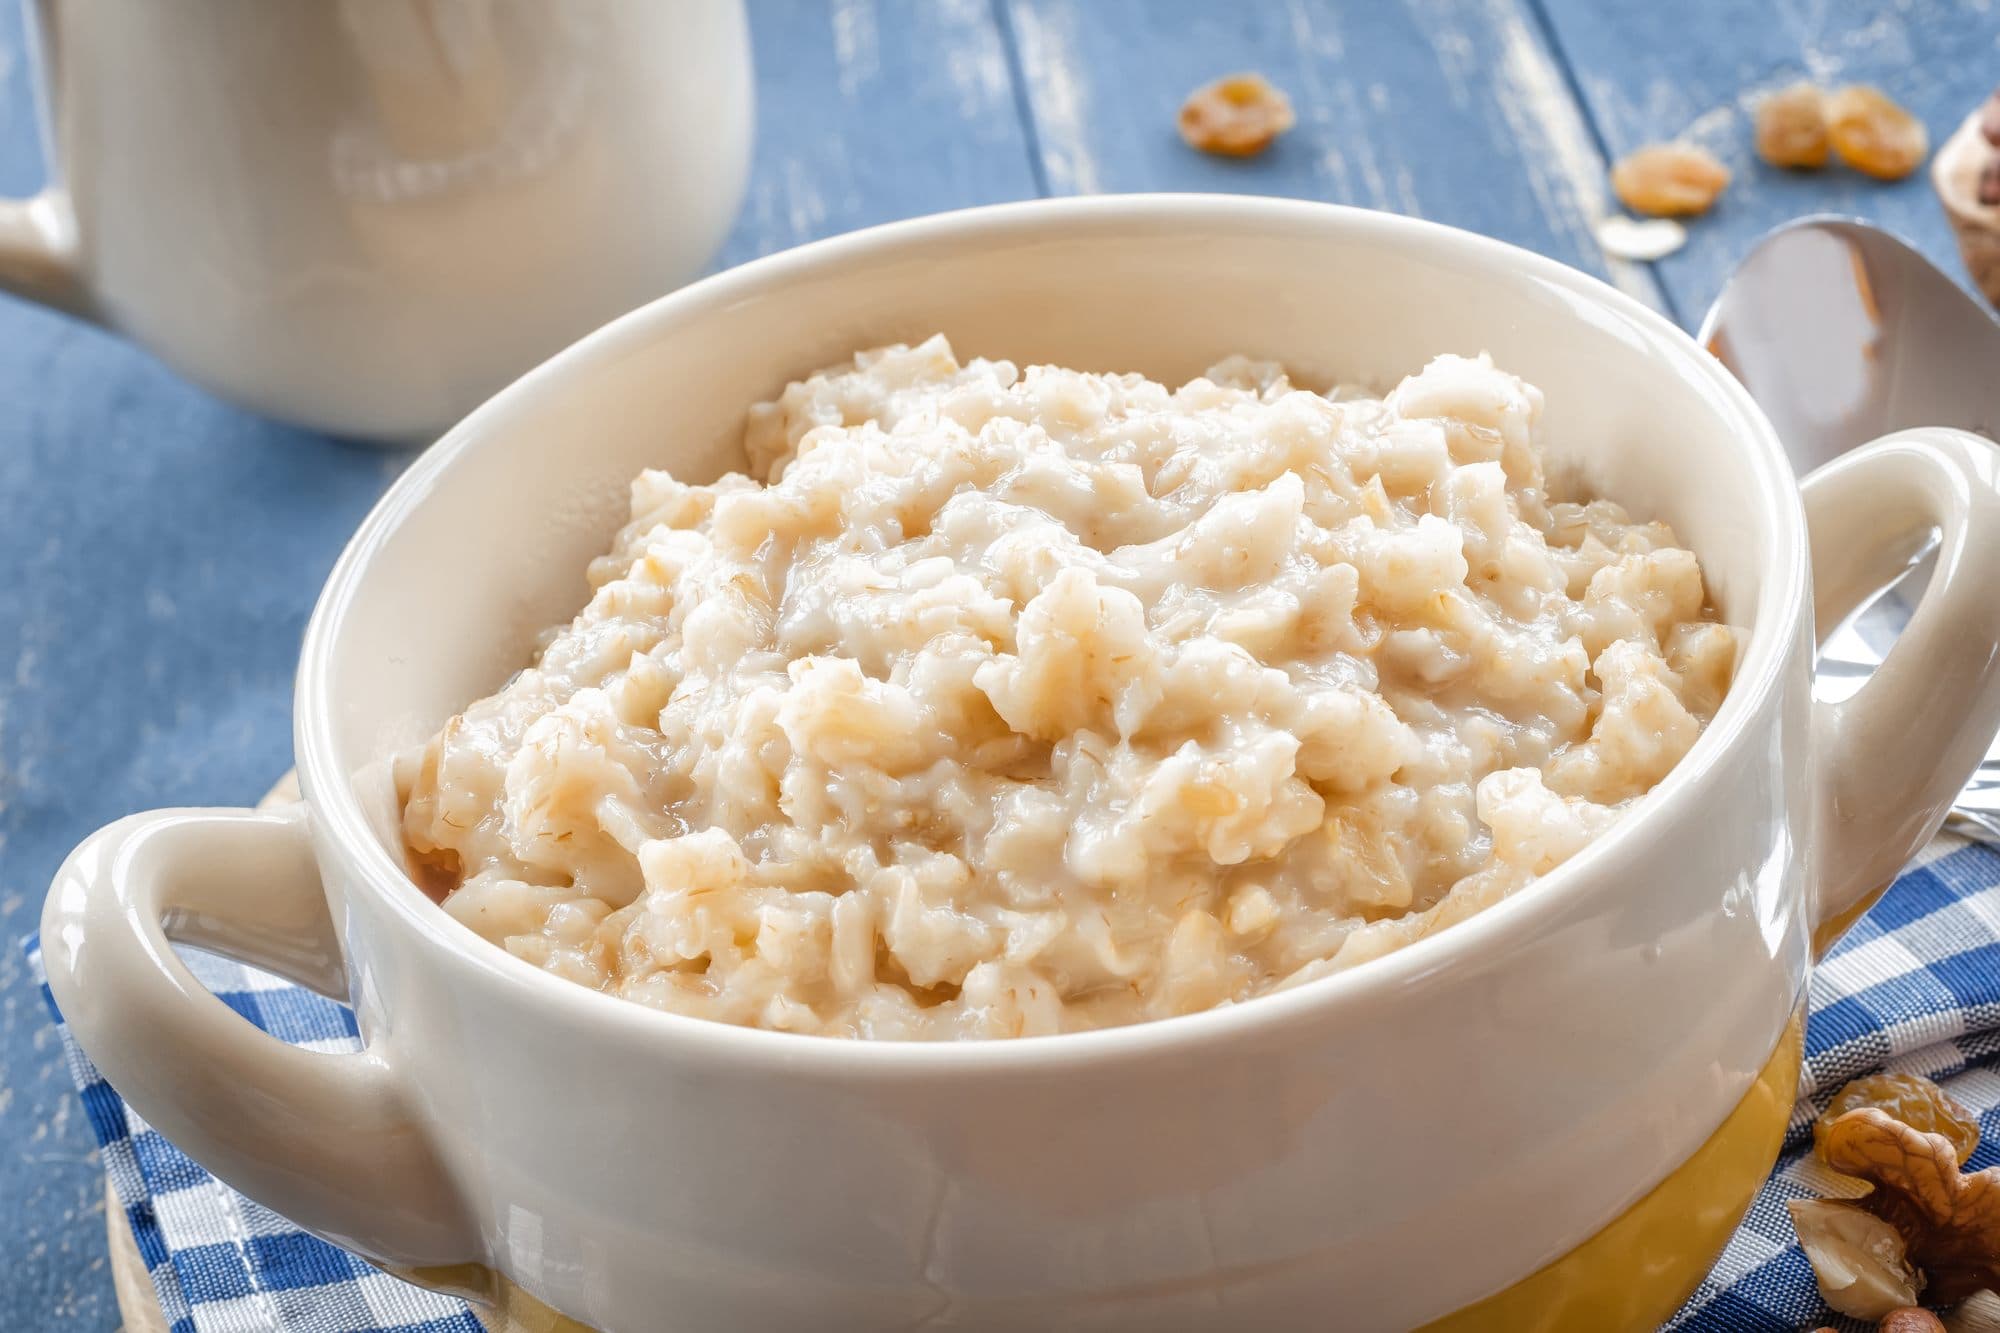 Oatmeal makes an easy quick breakfast on family vacation